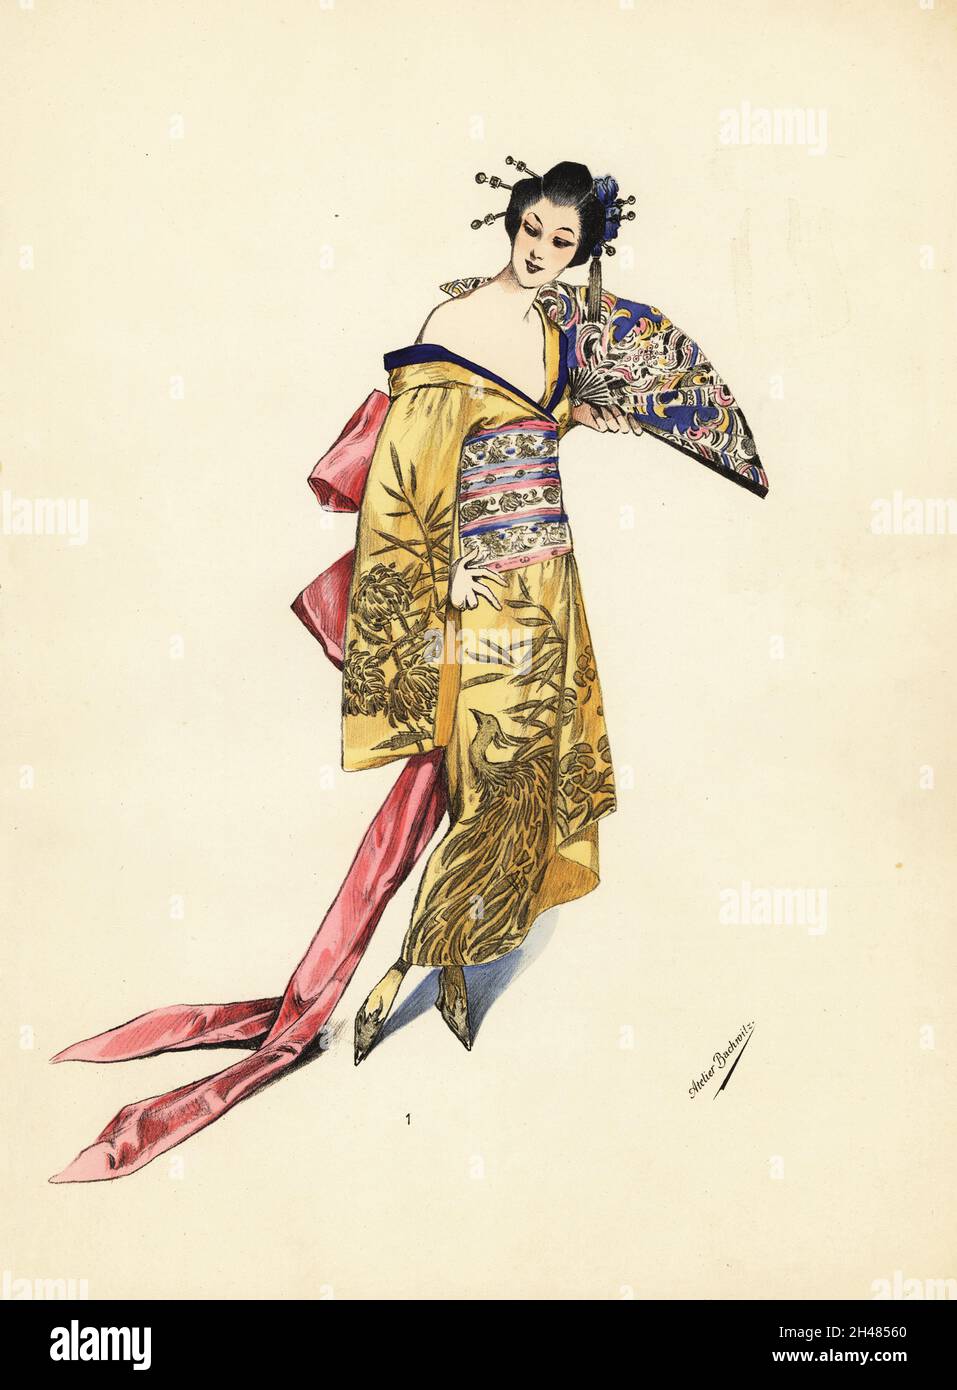 Woman in fancy dress Japanese costume wearing a yellow and pink Duchesse satin kimono, embroidered with chrysantemums and birds in silk and metal. With hair pins, fan, and huge pink obi bow ribbons. Handcoloured pochoir lithograph from Le Carnival Parisien, Volume 10, a special edition of Chic Parisien, published by Atelier Bachwitz, Vienna, 1920. Stock Photo